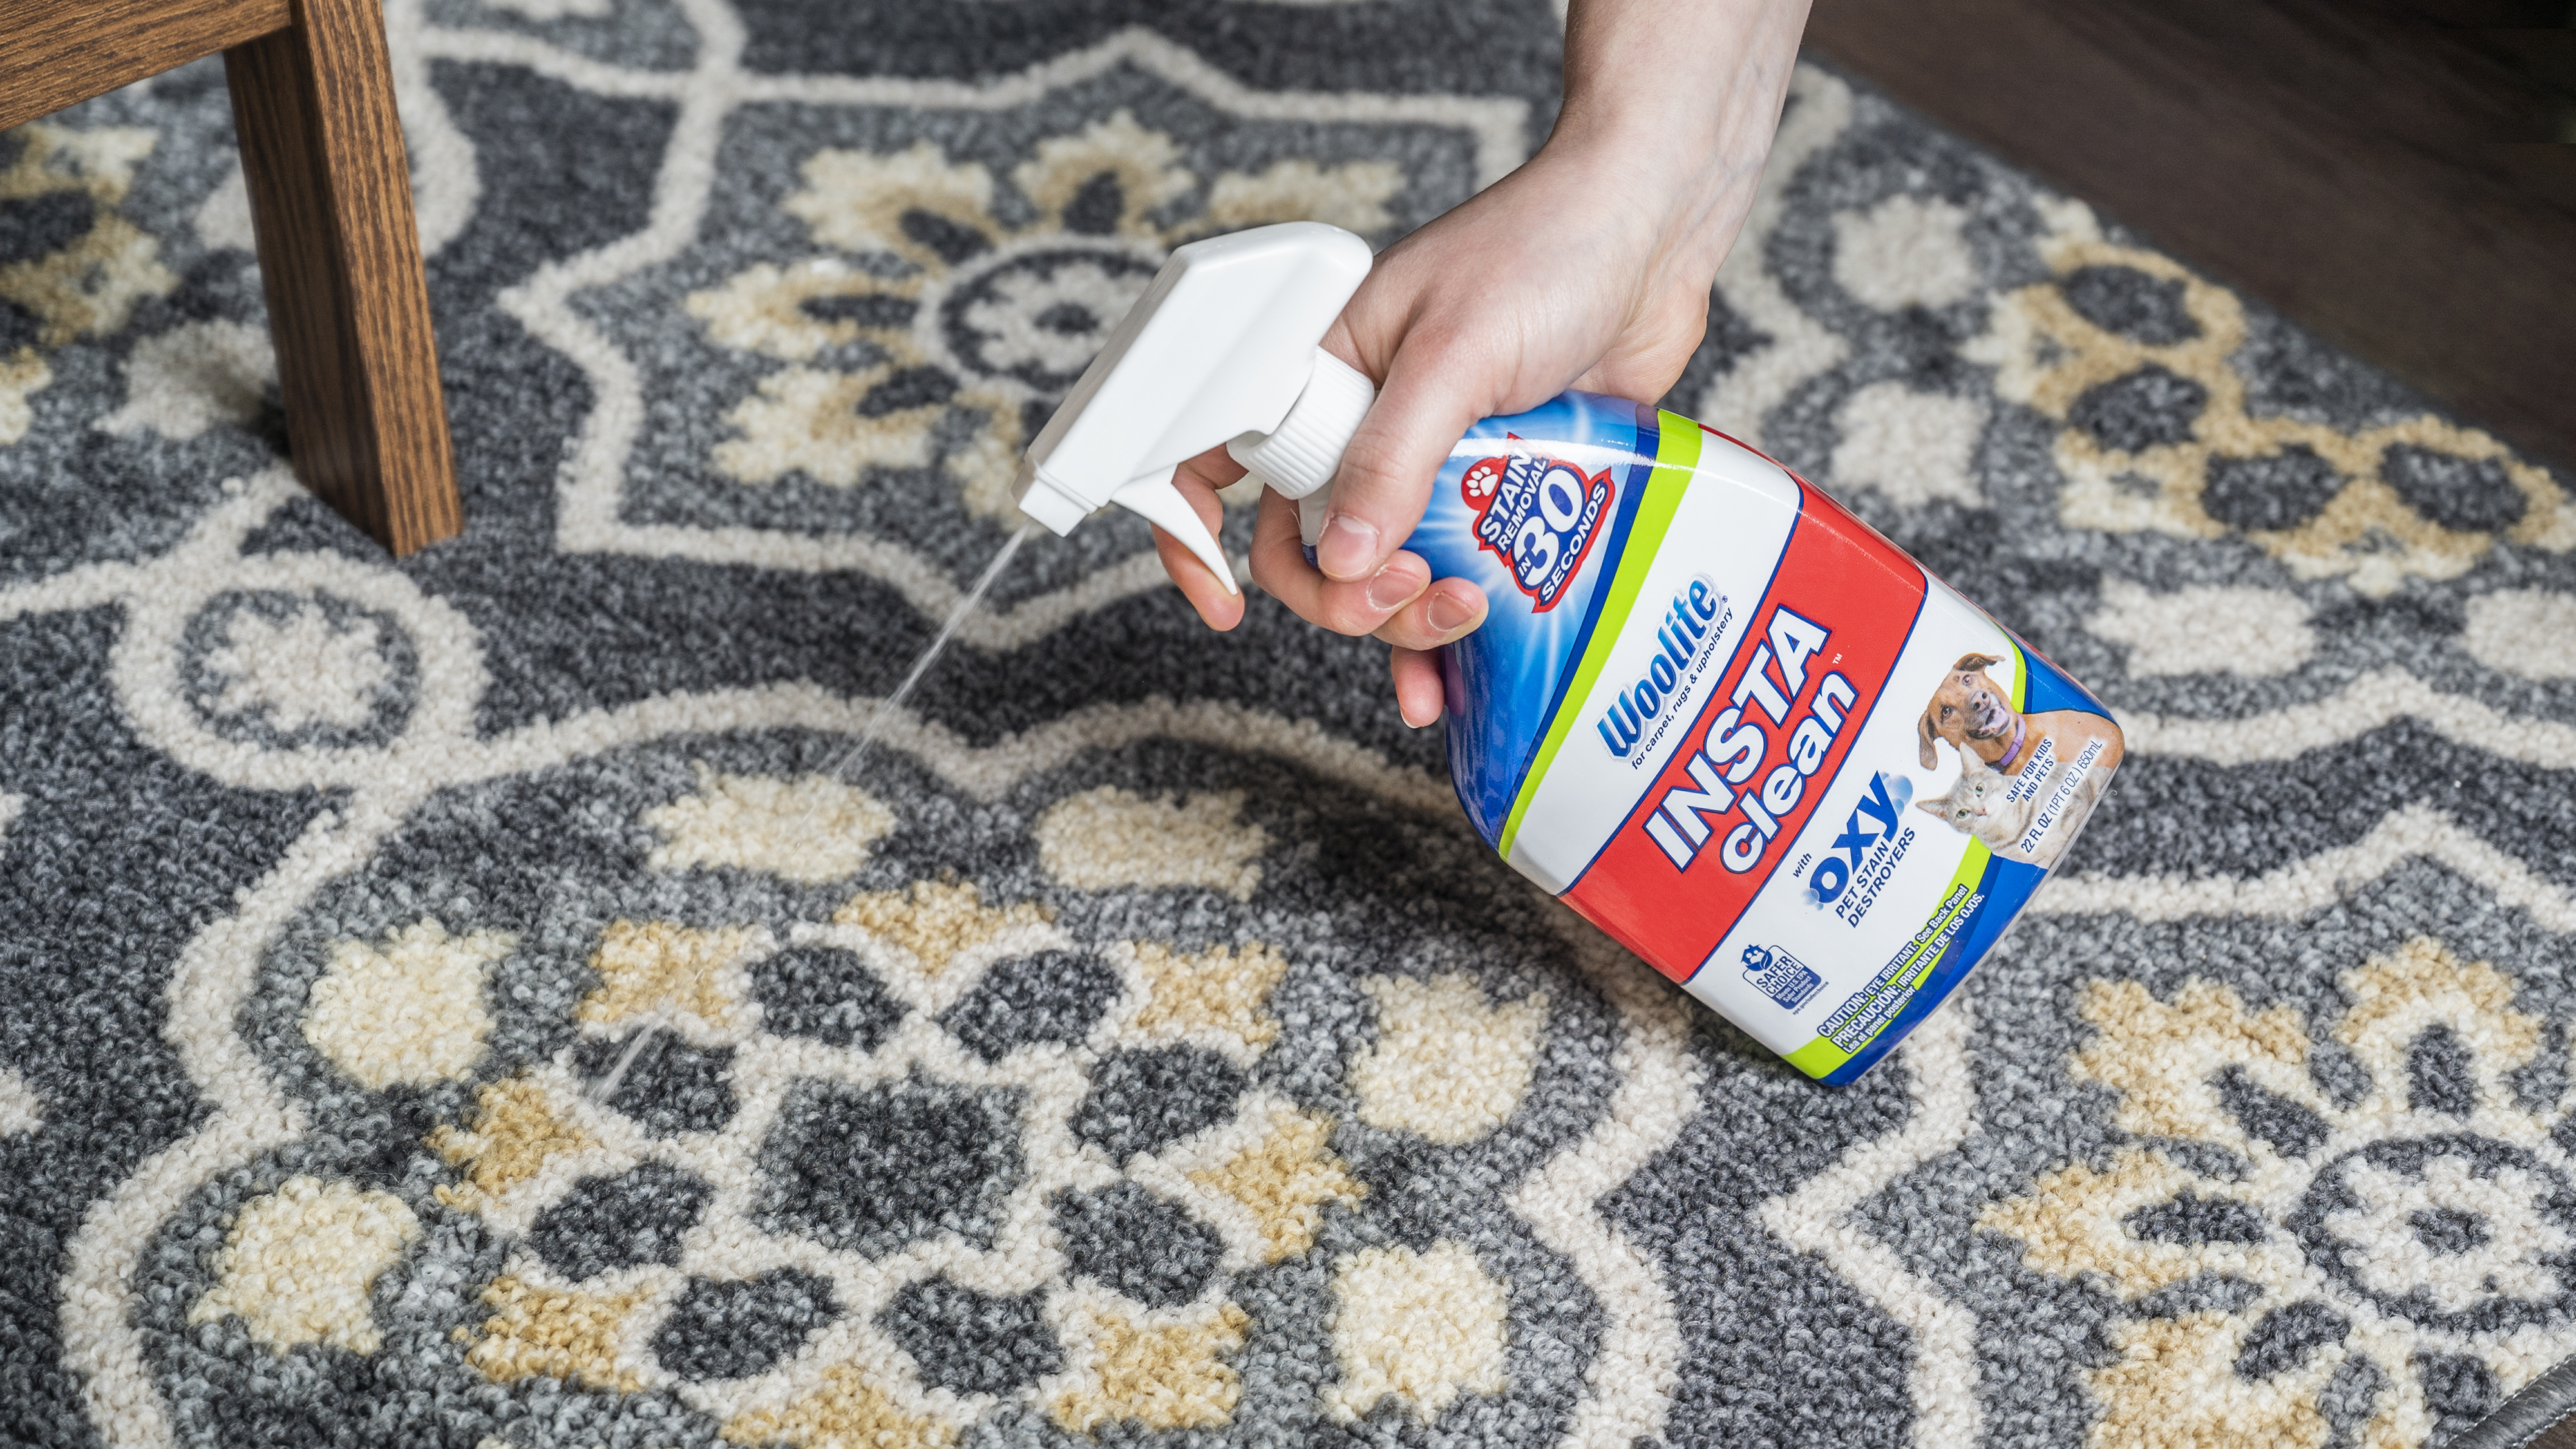 A person spraying Woolite InstaClean carpet stain remover onto a carpet.